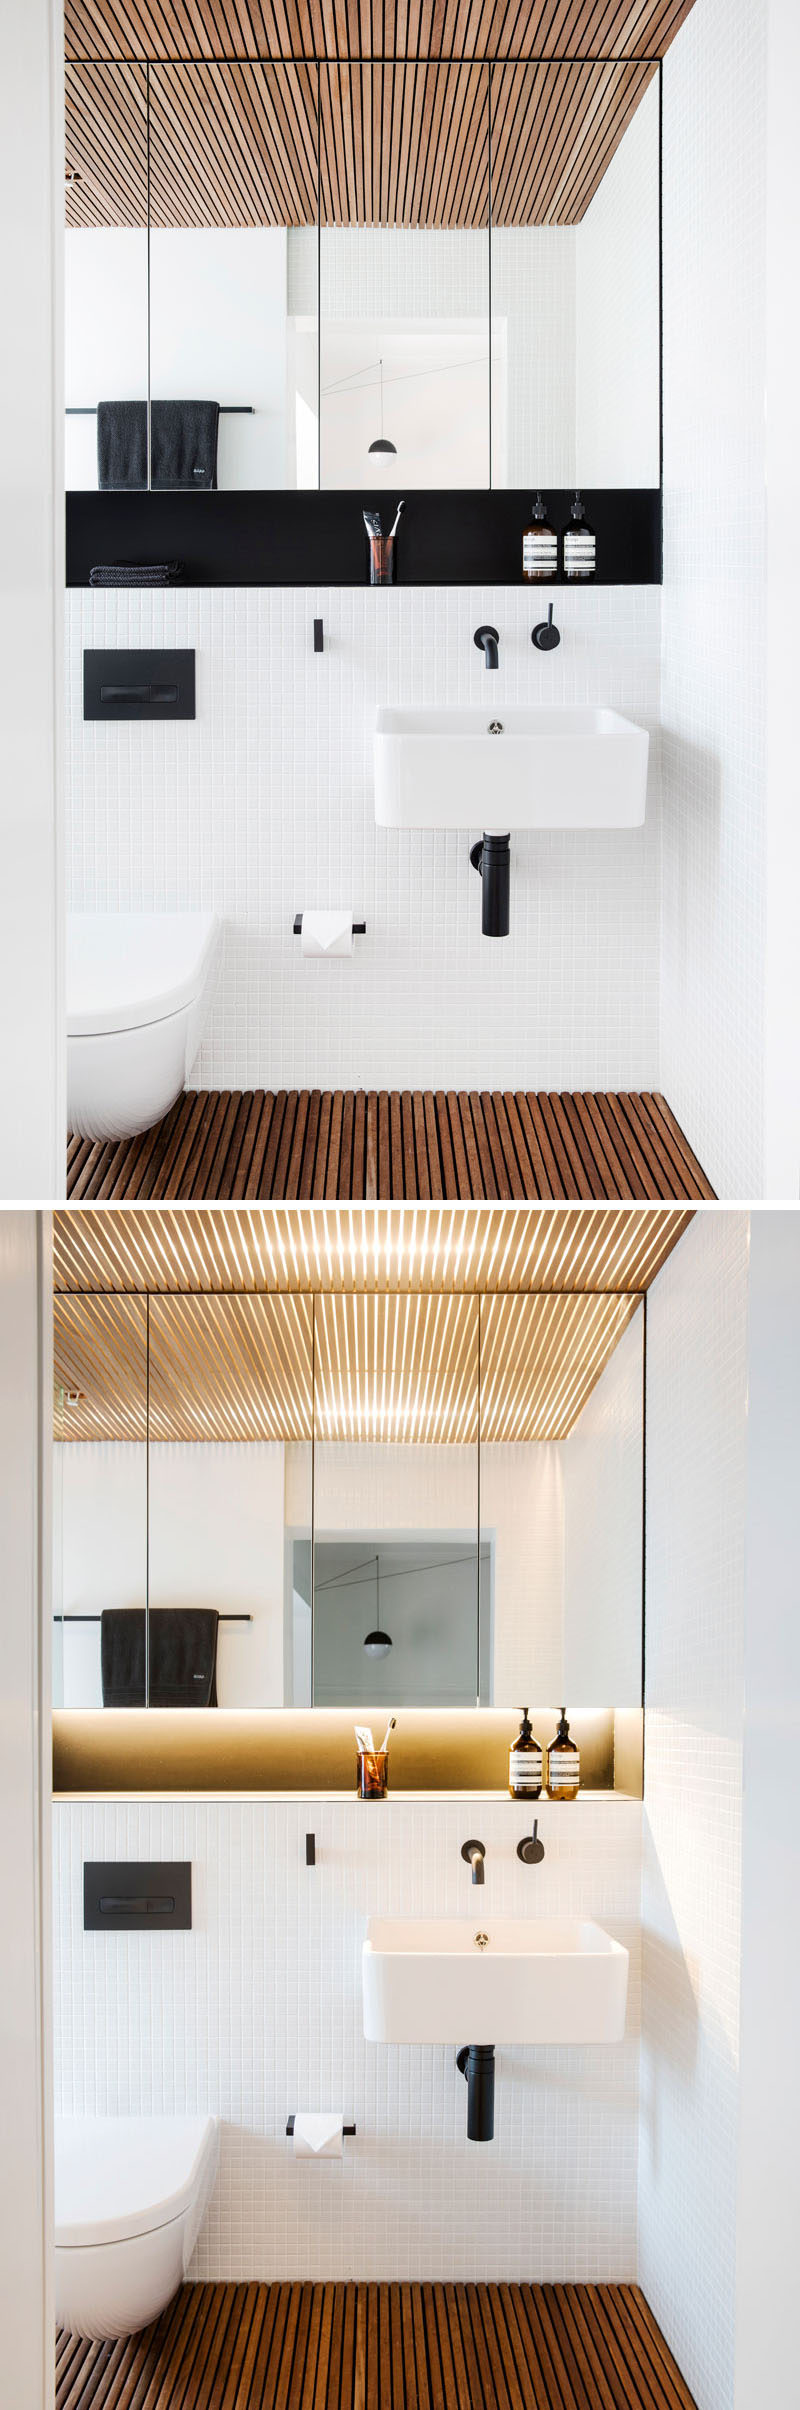 This modern bathroom features a timber slat floor and ceiling to introduces texture and tactility, while the white tiles and large mirror help to brighten the space.